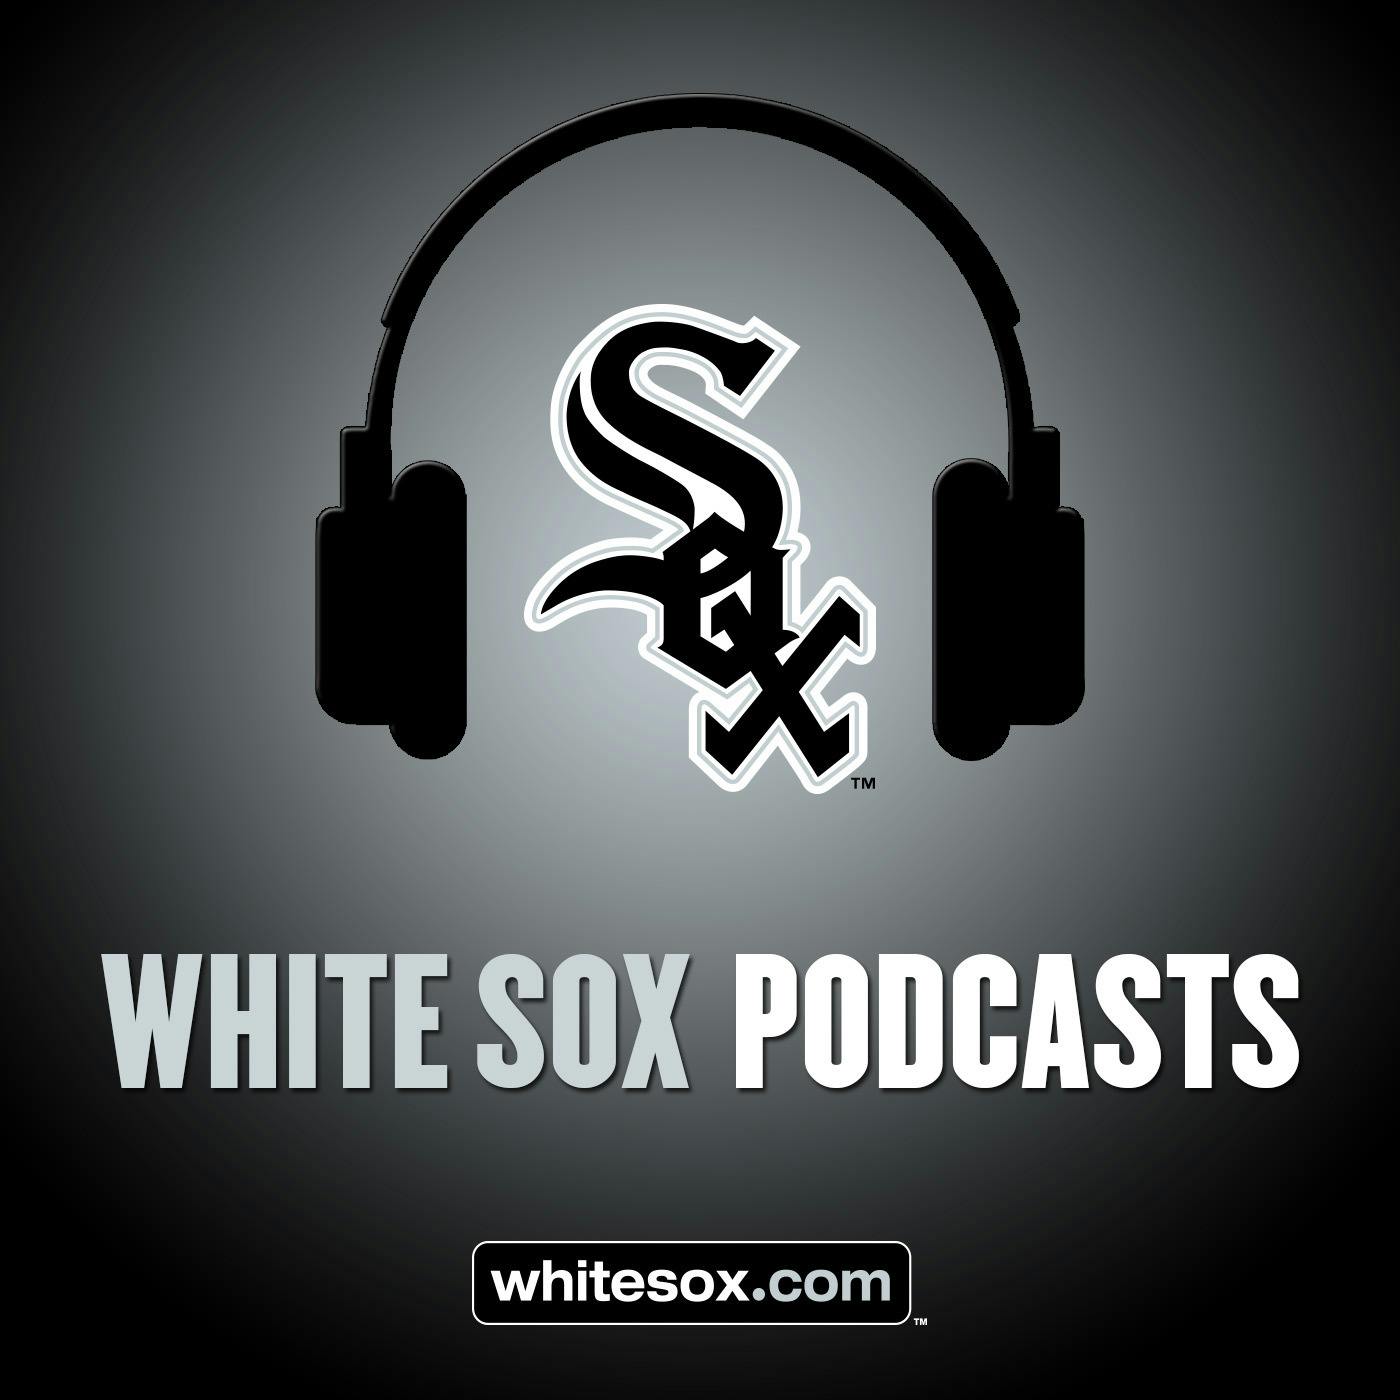 10/20/18: White Sox Weekly